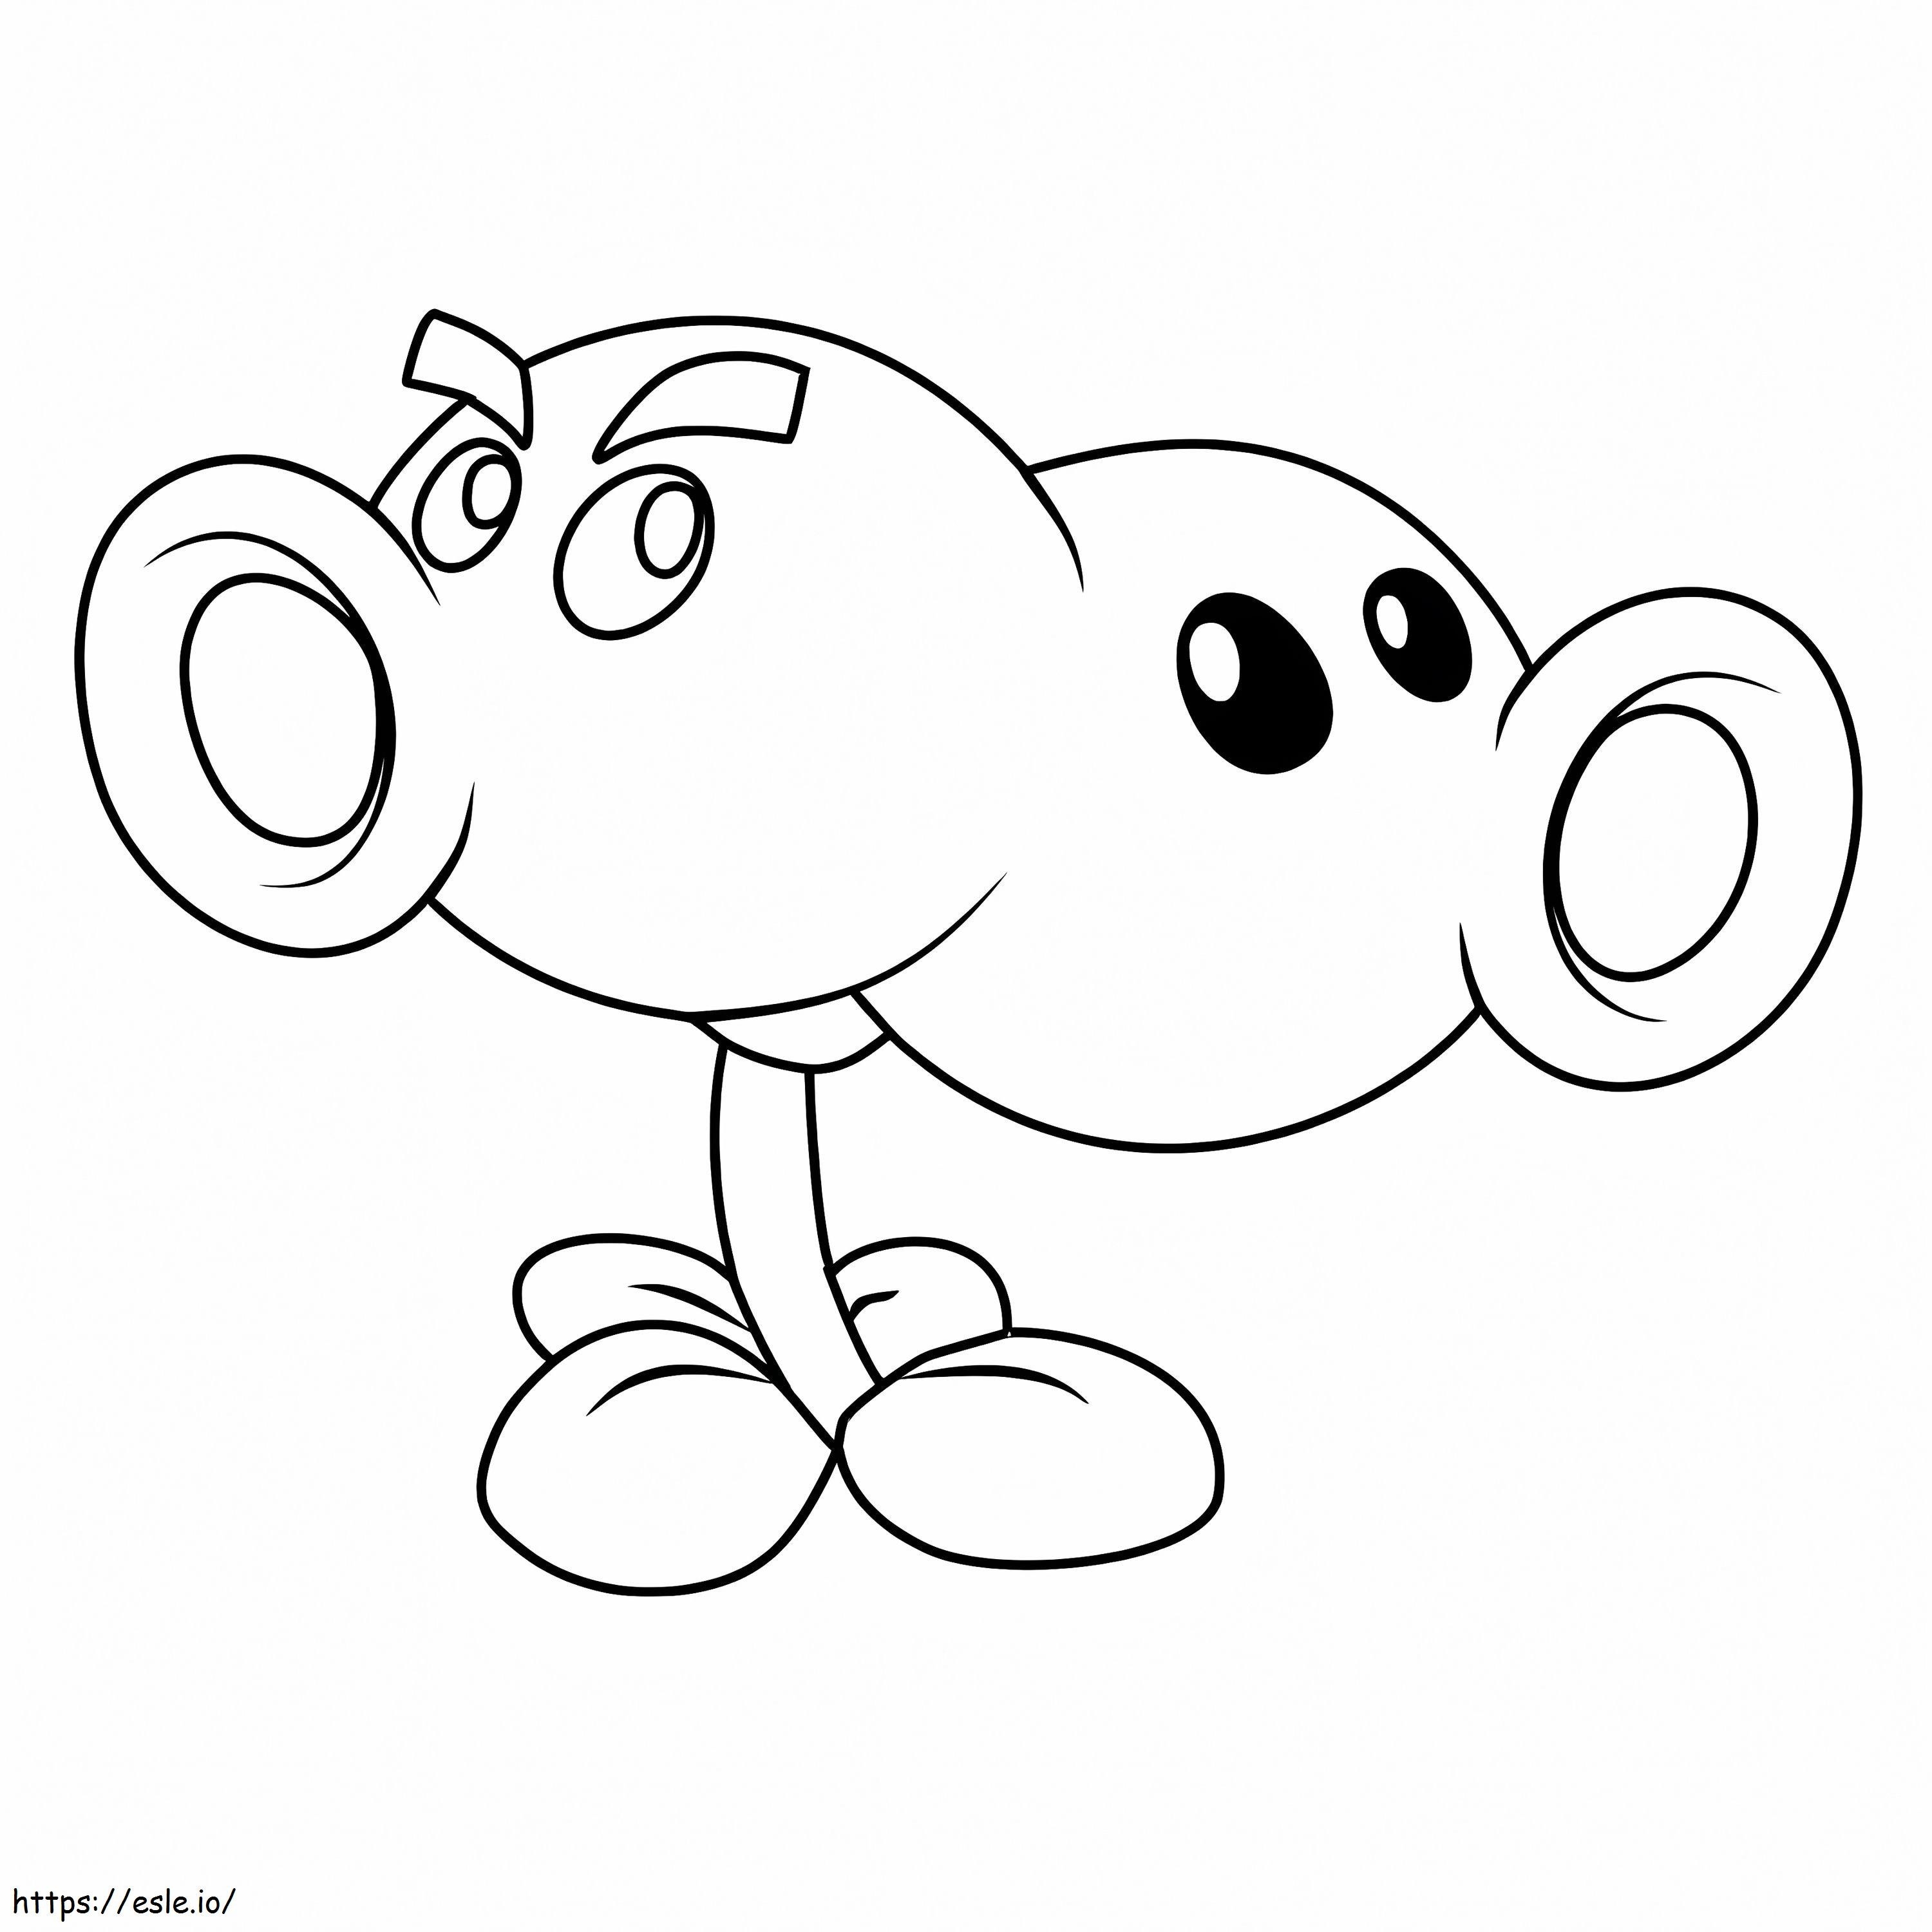 Split Pea In Plants Vs Zombies coloring page